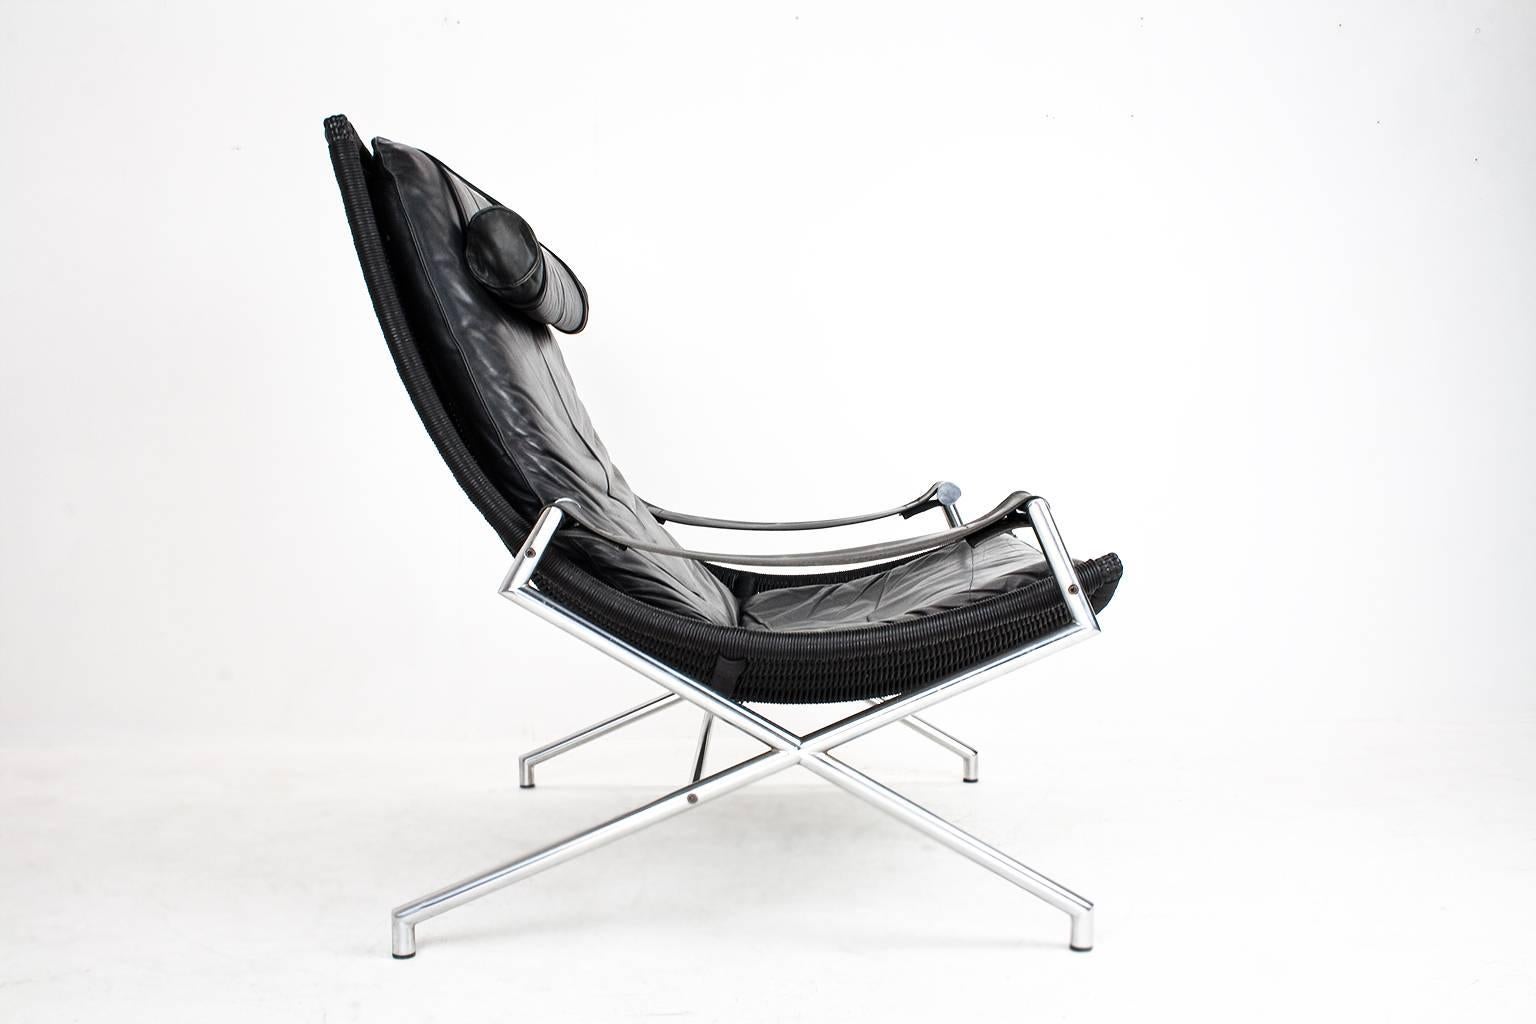 Pair of vintage Dutch modern lounge chairs in faux wicker, chromed metal and black leather by Gerard Van Den Berg for Rohé (1980, Noordwolde - the Netherlands). All in original condition, checked, cleaned and polished, all in excellent condition.